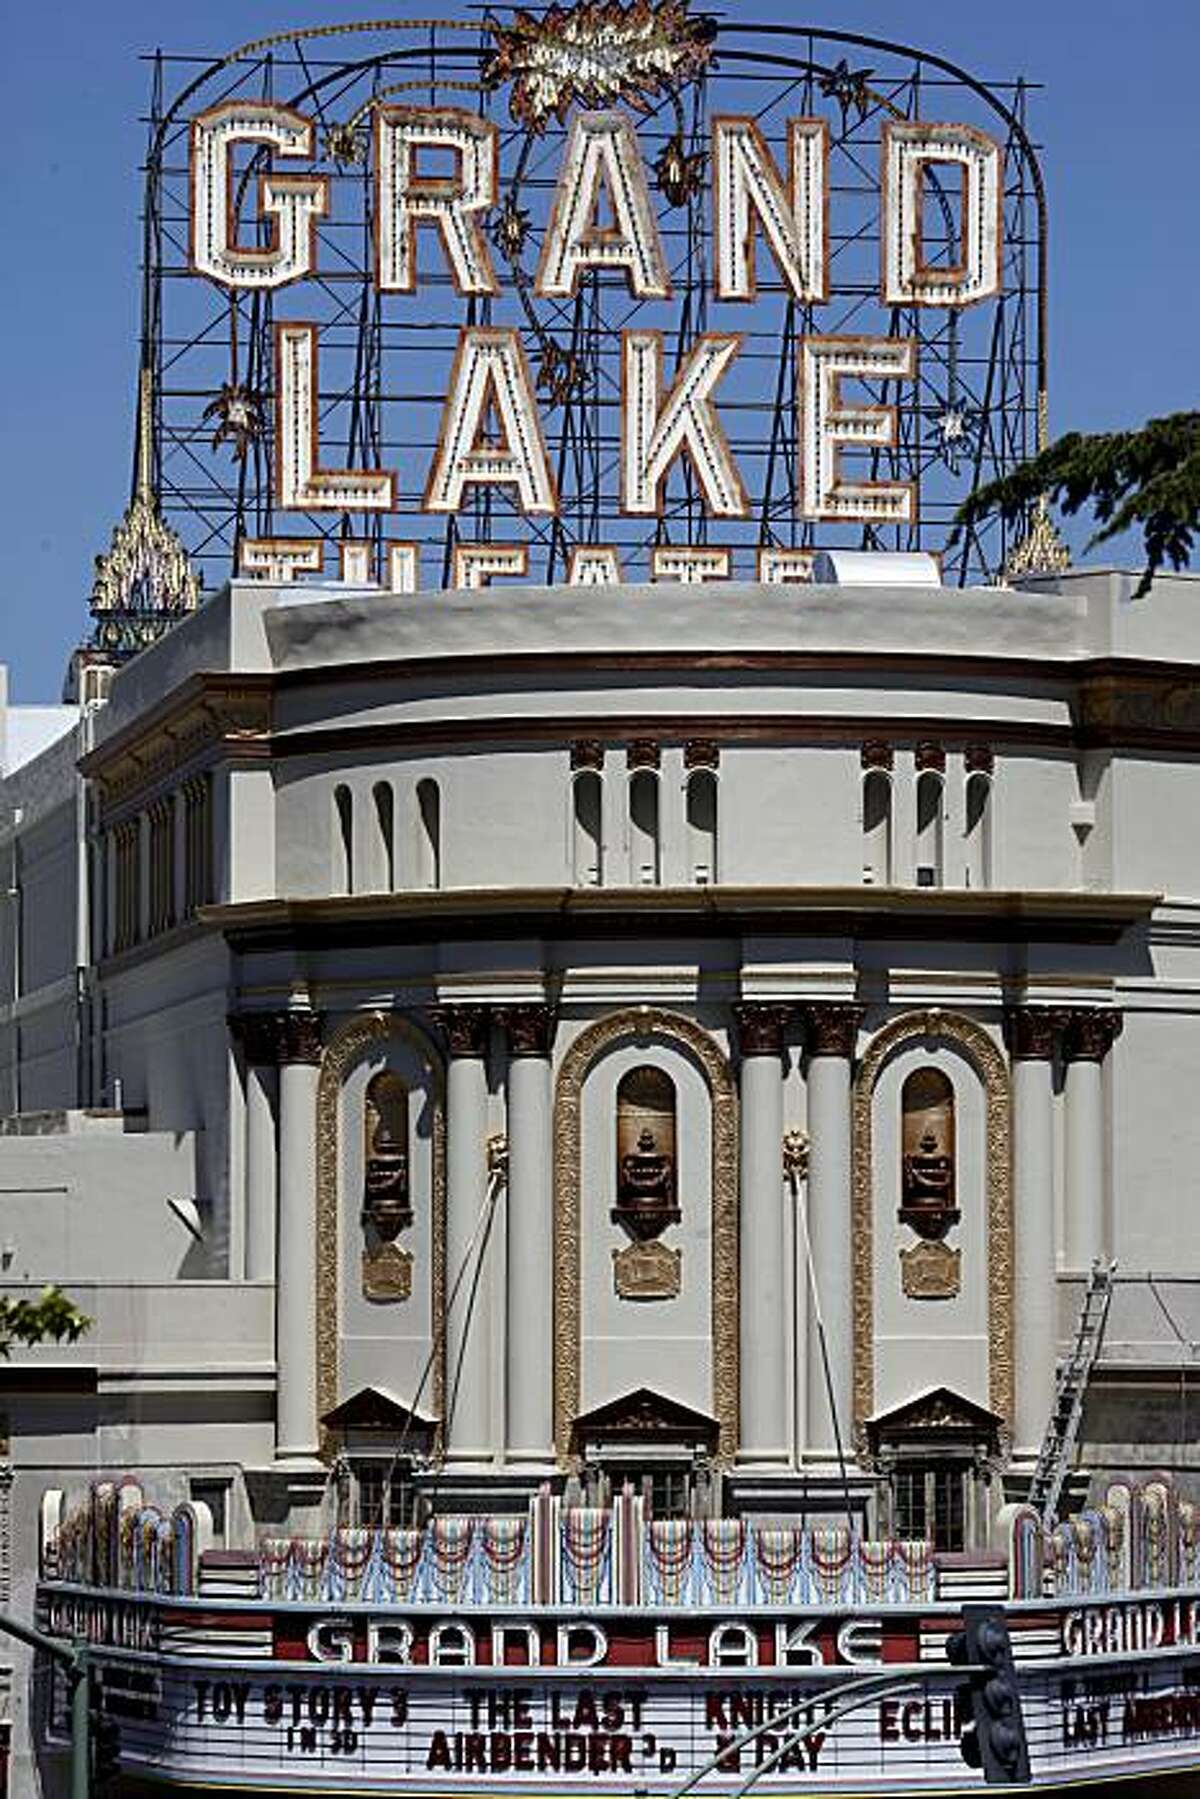 For Grand Lake Theater owner, movies must go on